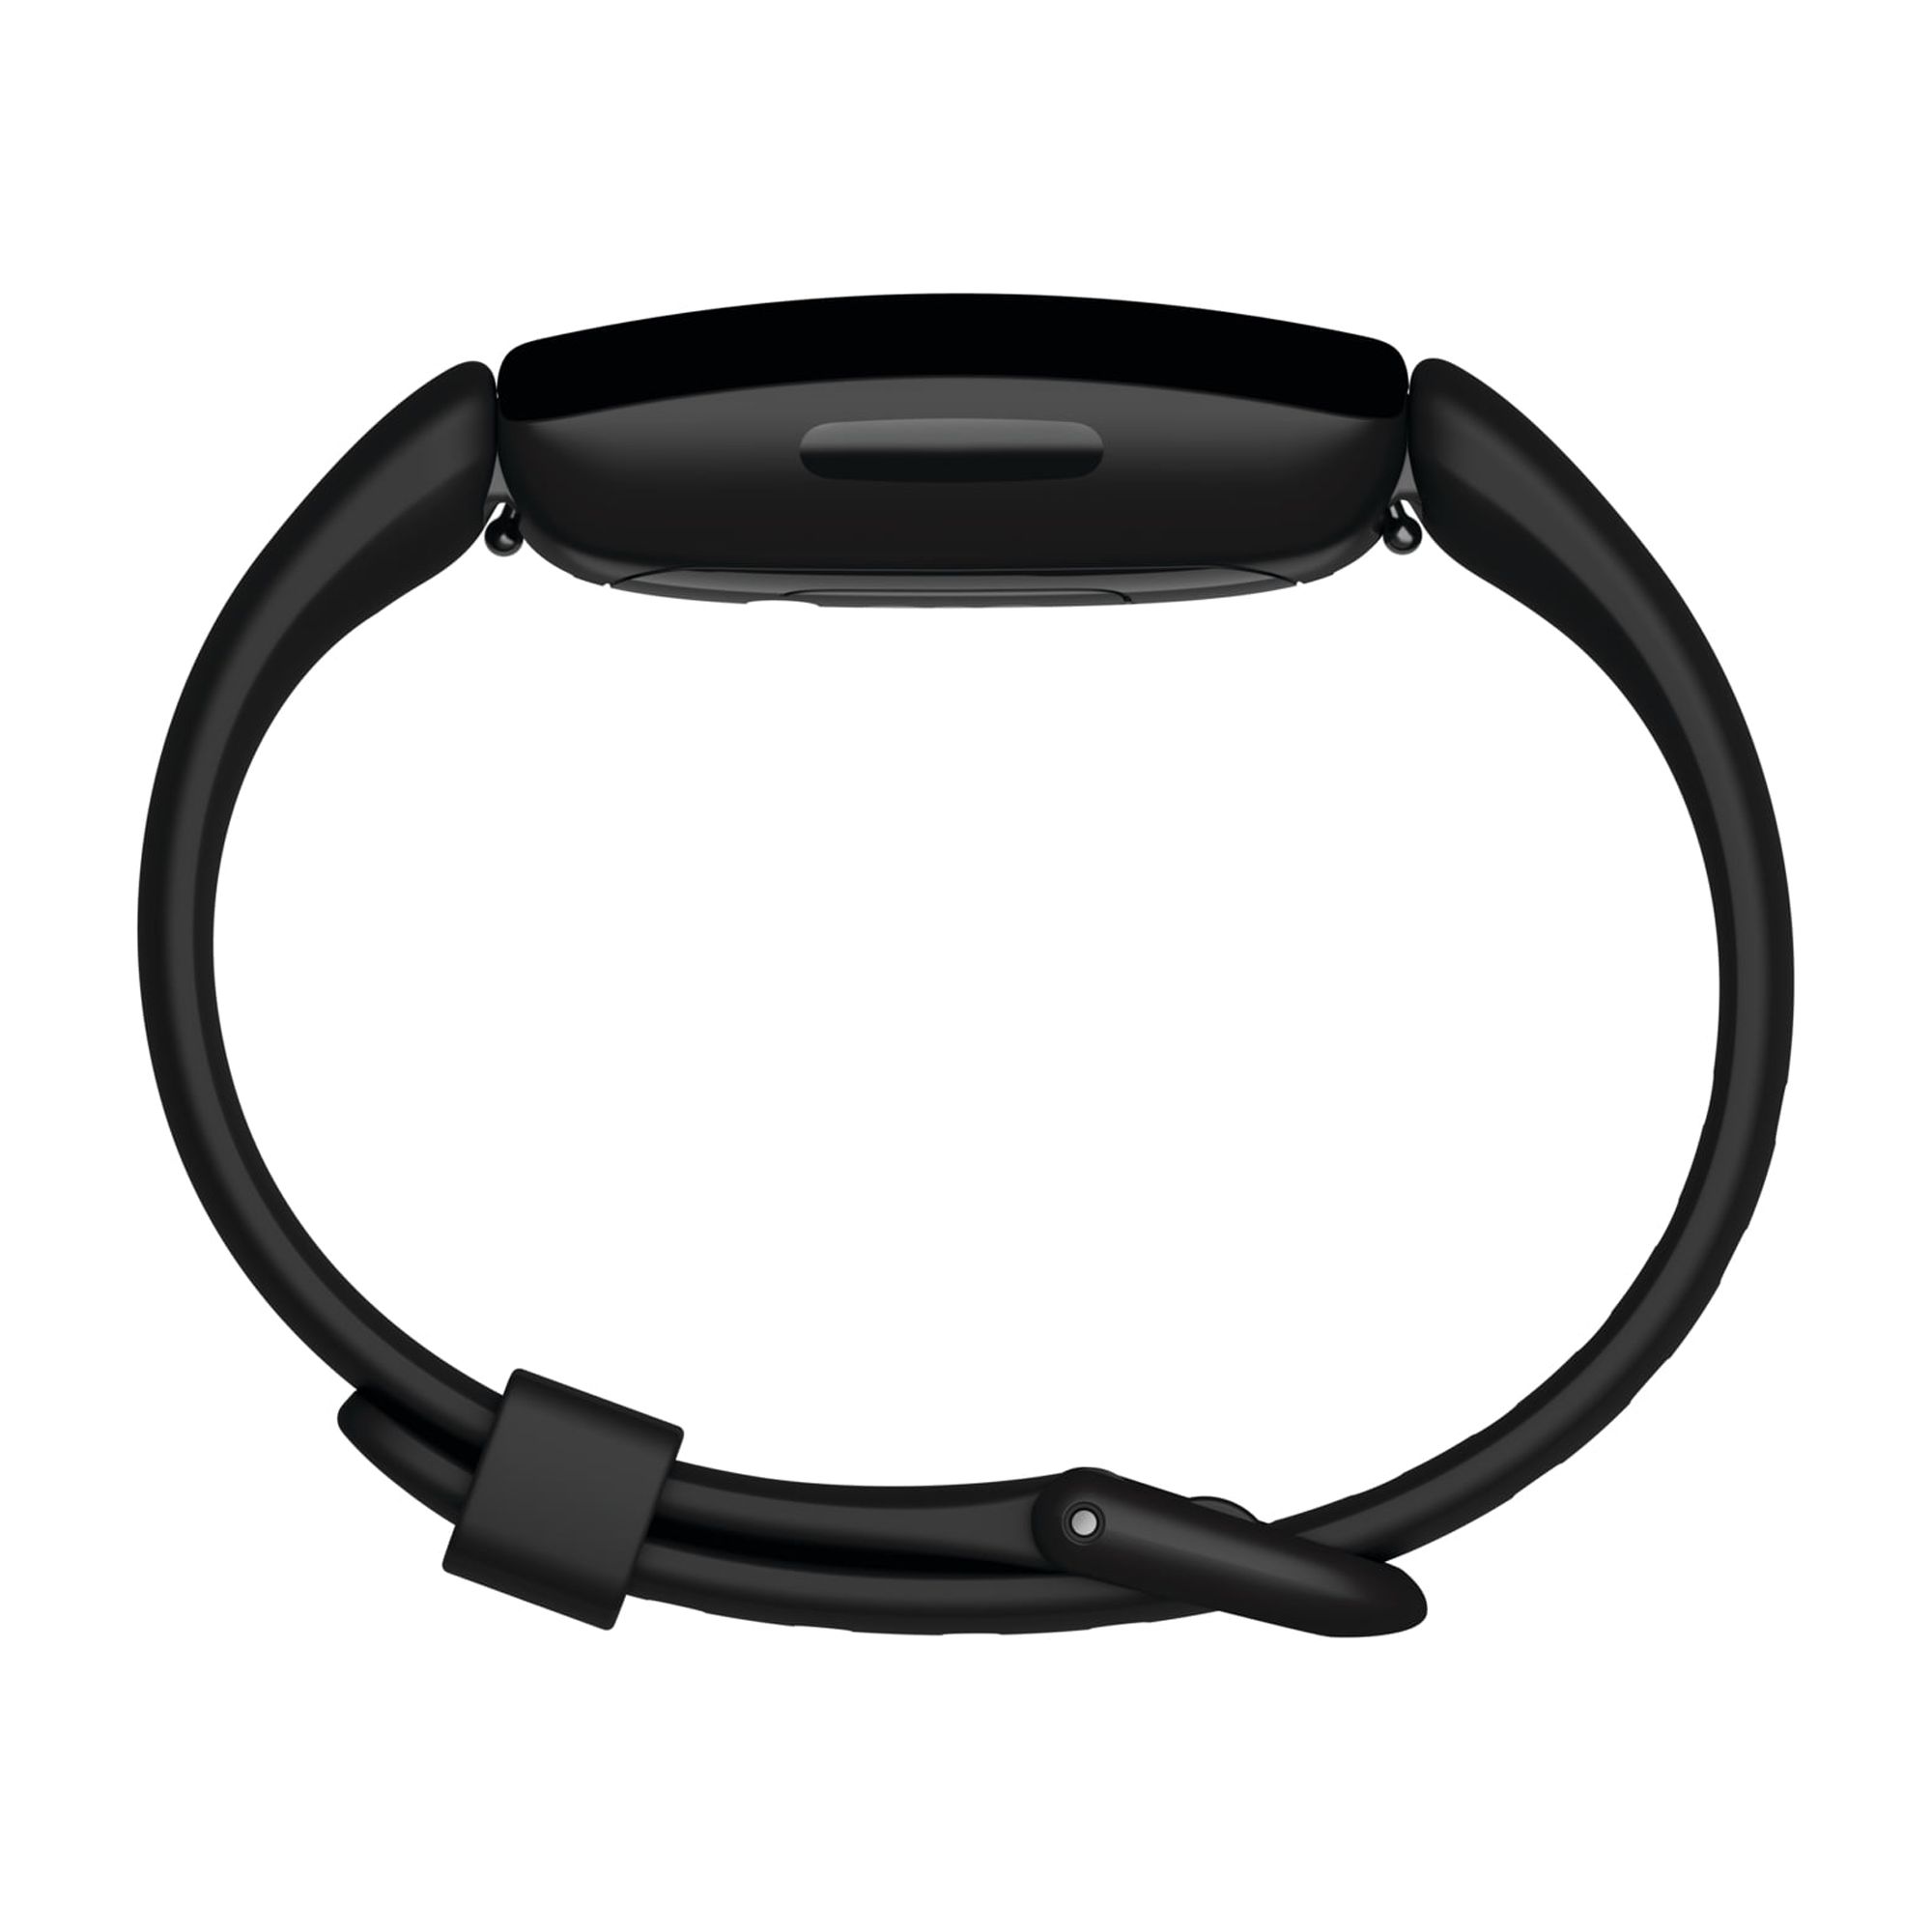 Fitbit Inspire 2 Fitness Tracker - Black - image 3 of 6